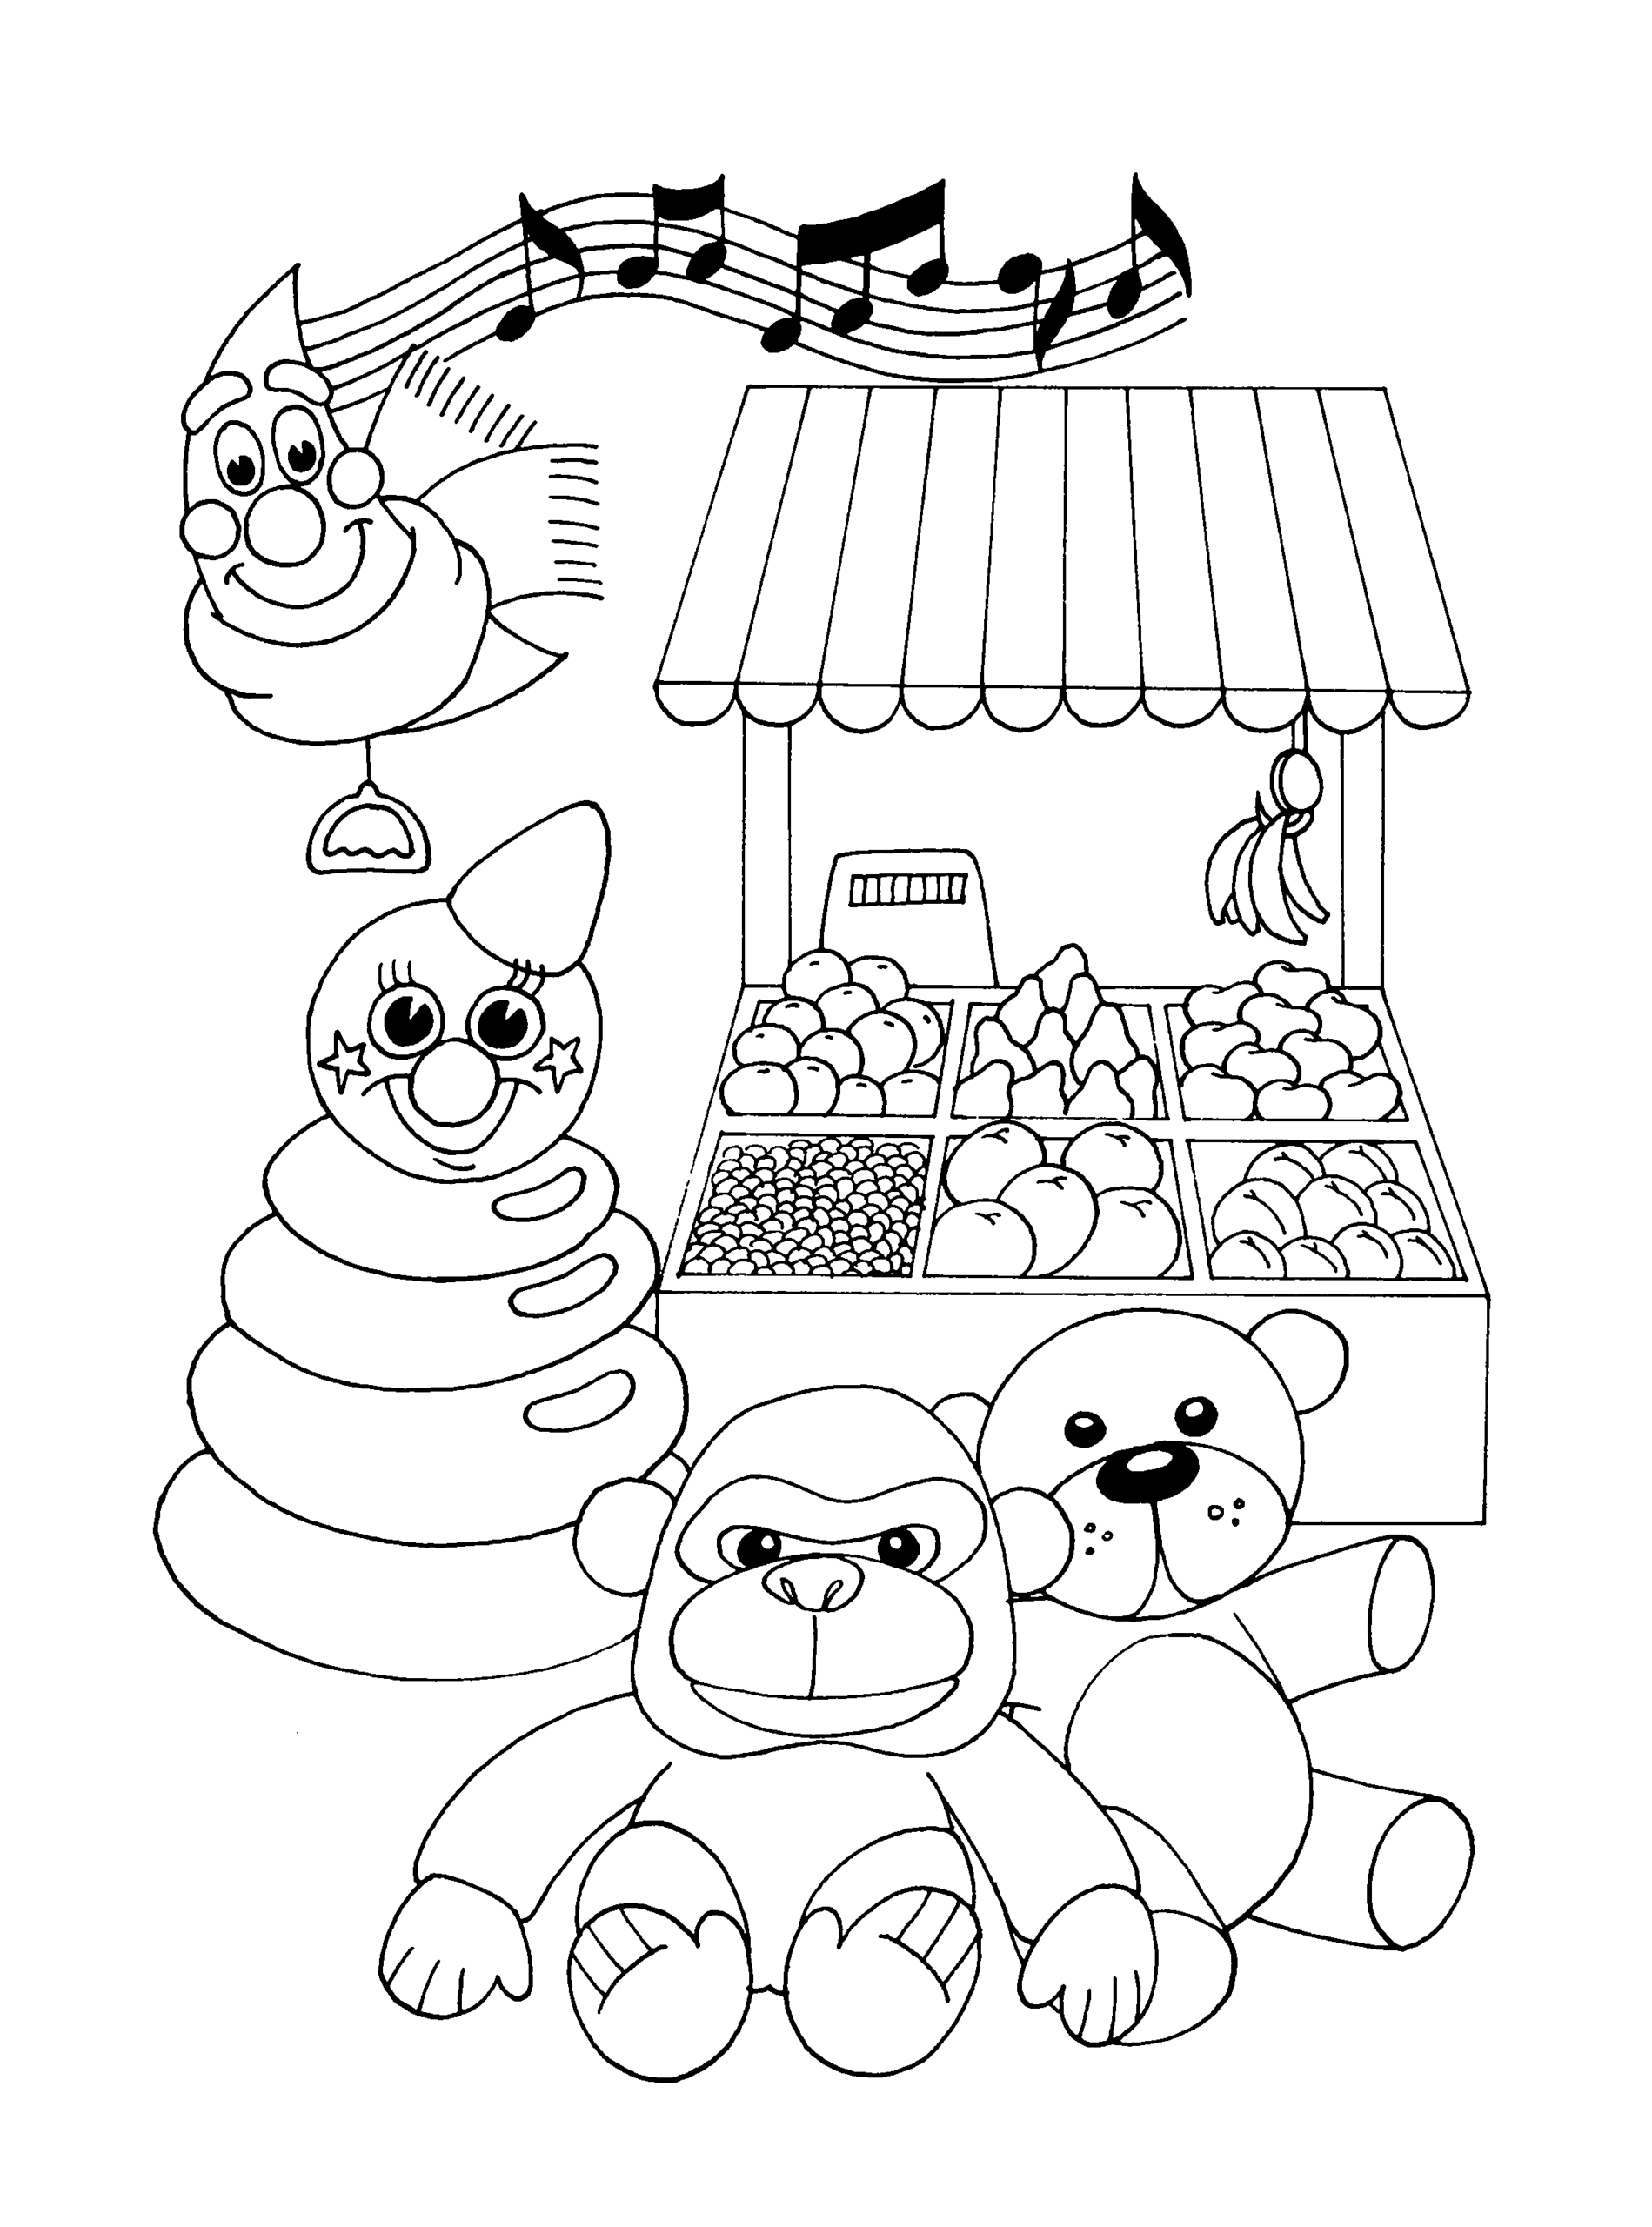 Spike and Suzy Coloring Pages Cartoons spike and suzy 35 Printable 2020 5923 Coloring4free